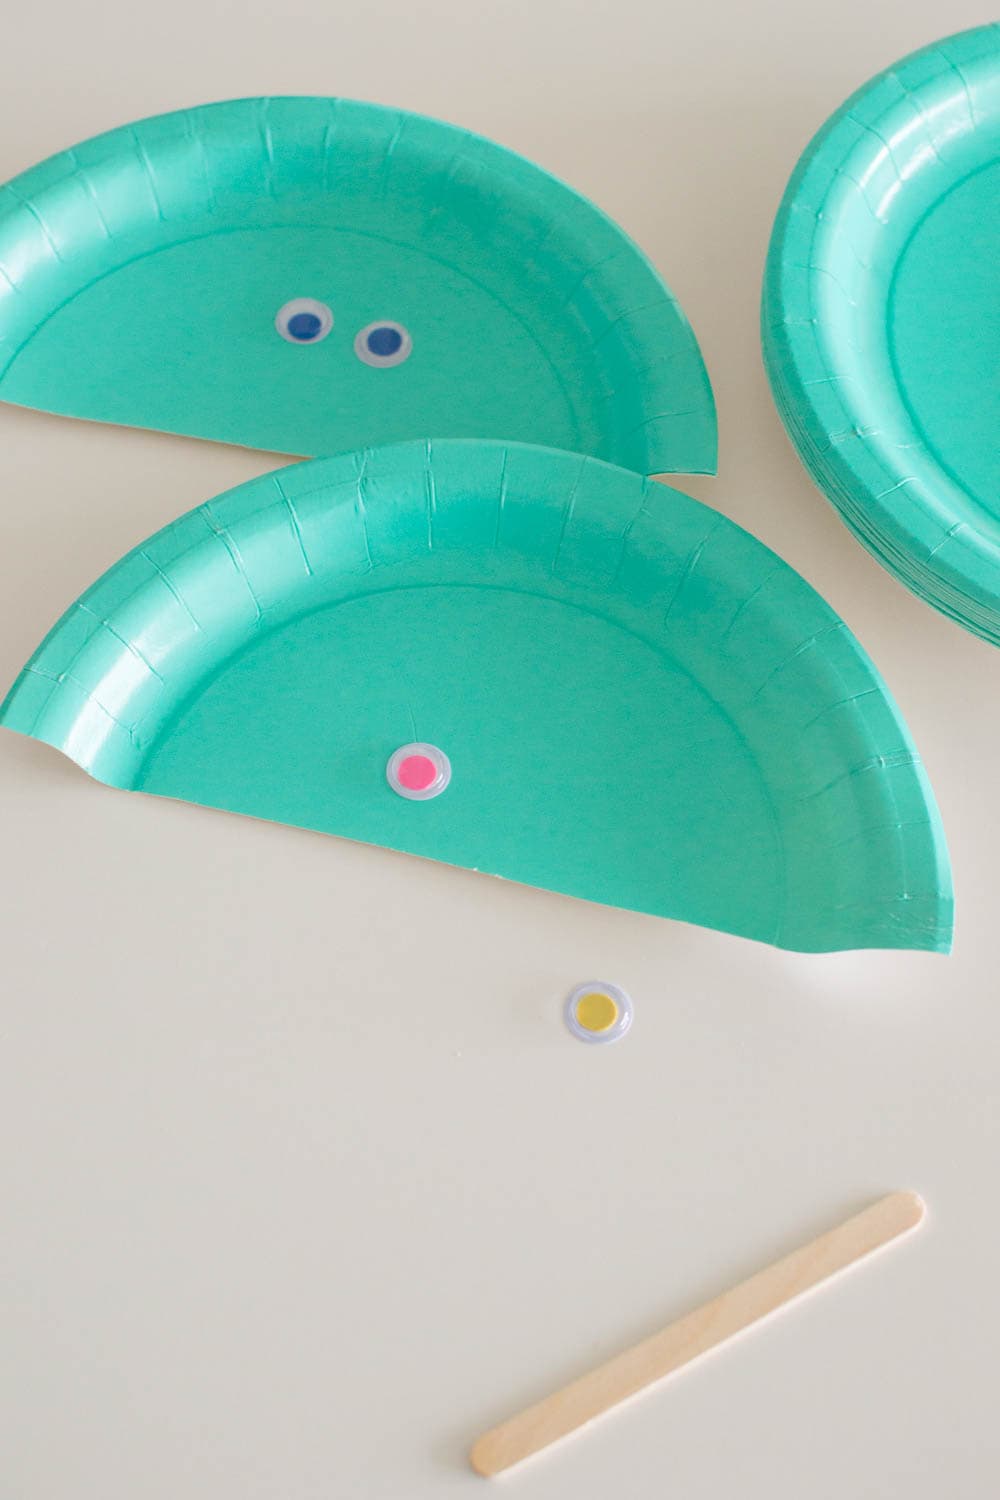 Adding colorful googly eyes to paper plate halves